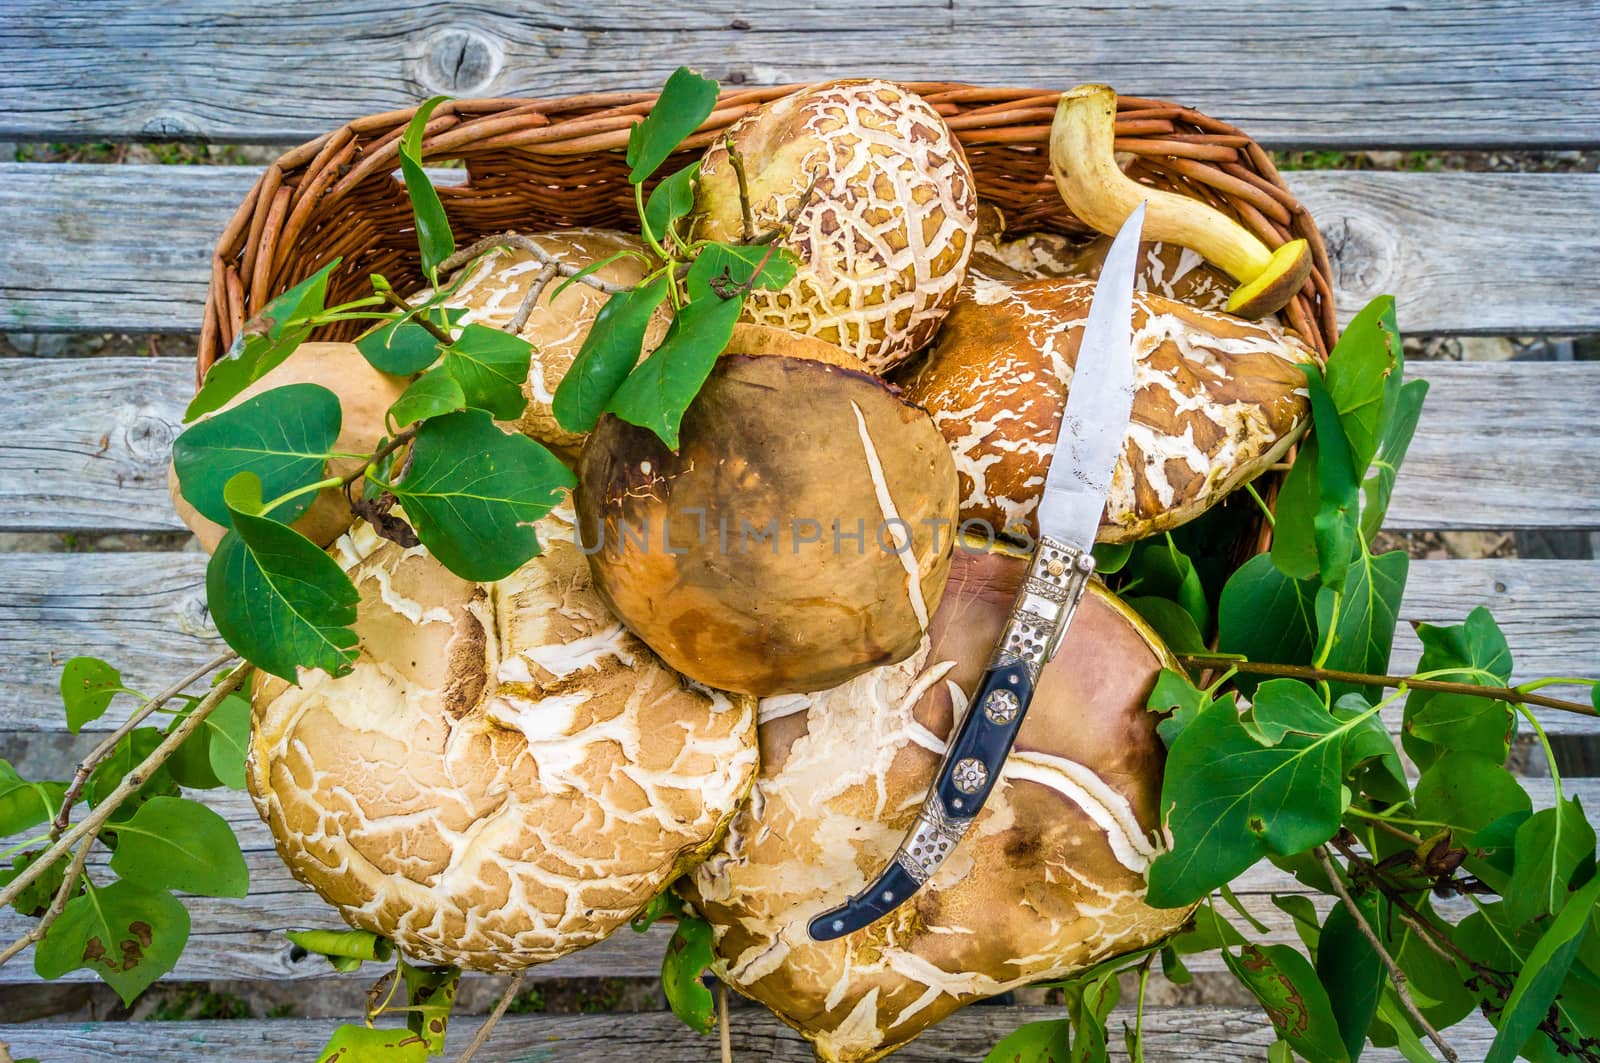 Cep mushrooms basket and a knife after mushroom gathering in France